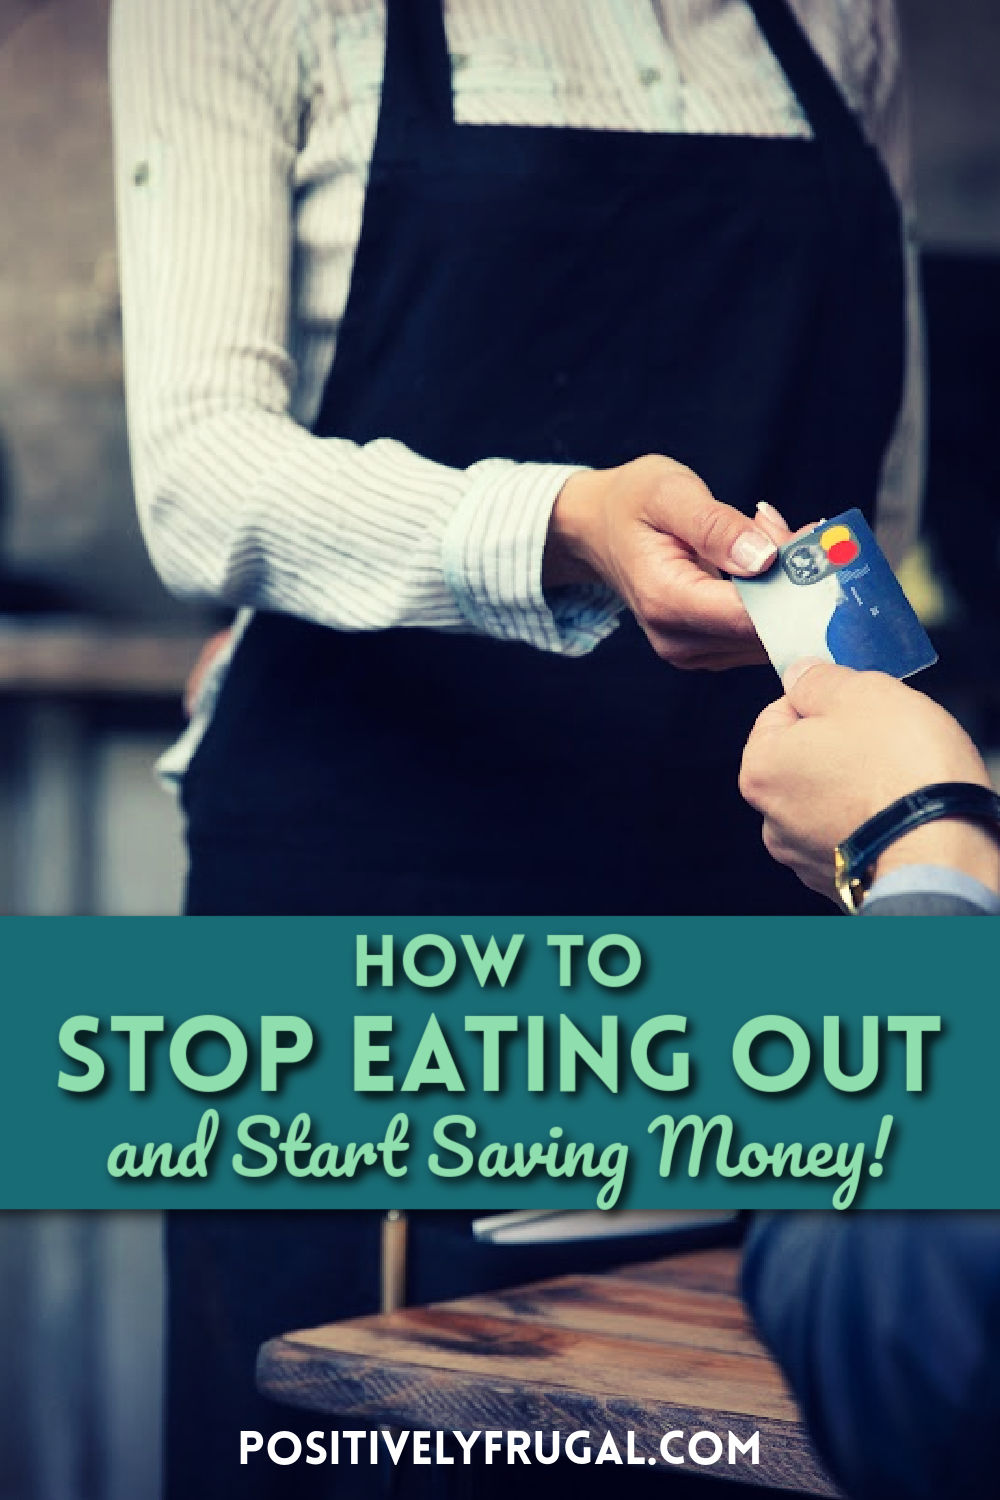 How To Stop Eating out and Start Saving by PositivelyFrugal.com